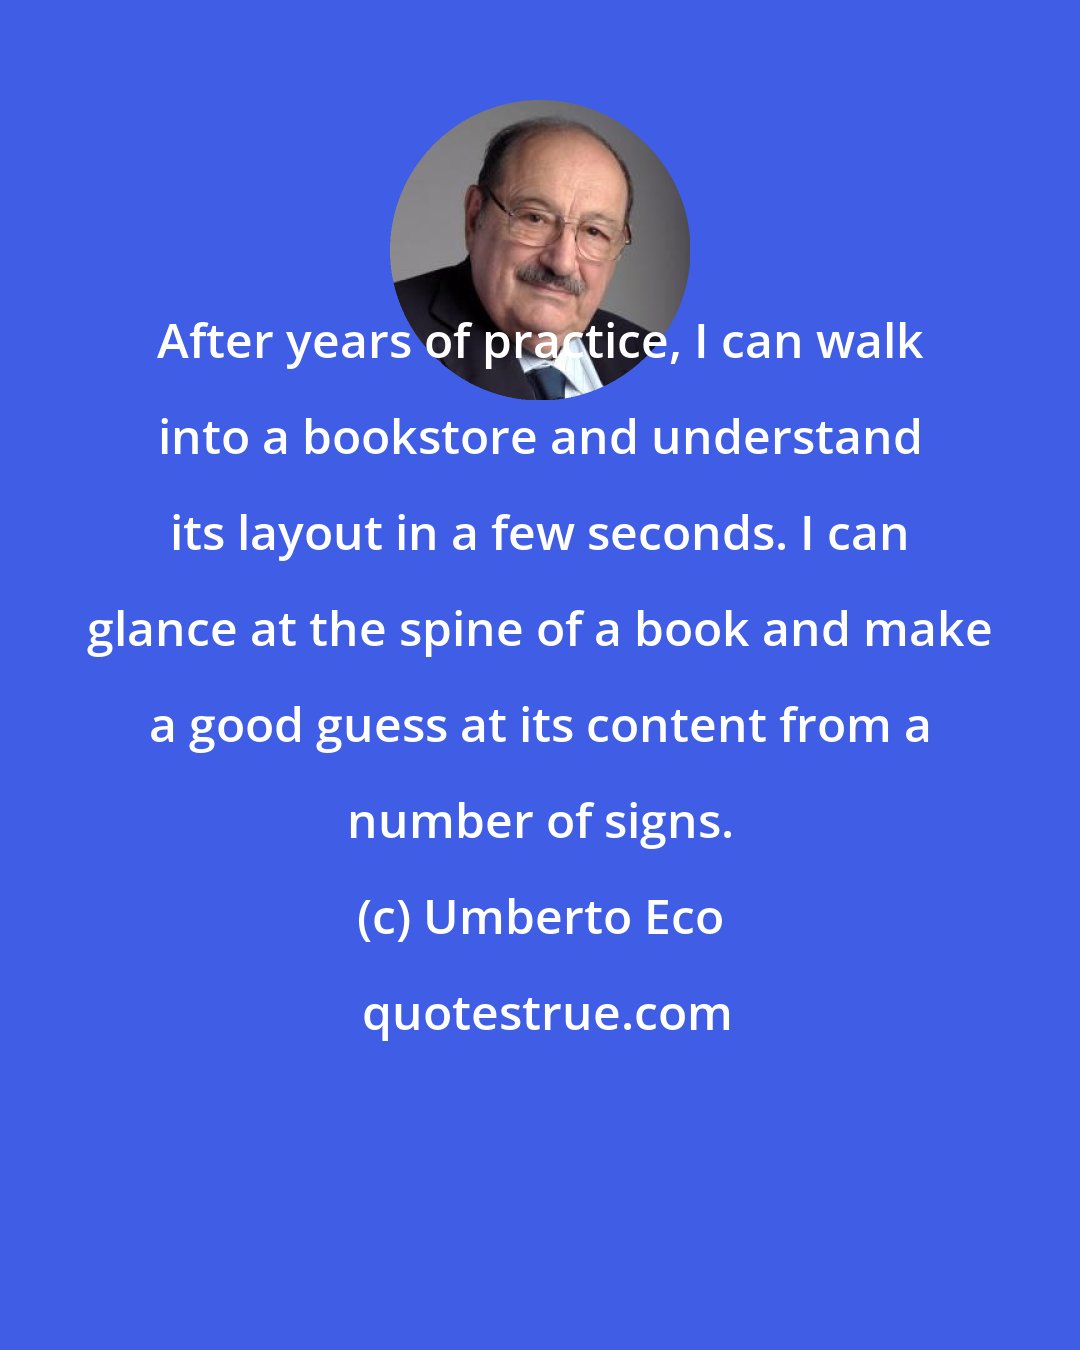 Umberto Eco: After years of practice, I can walk into a bookstore and understand its layout in a few seconds. I can glance at the spine of a book and make a good guess at its content from a number of signs.